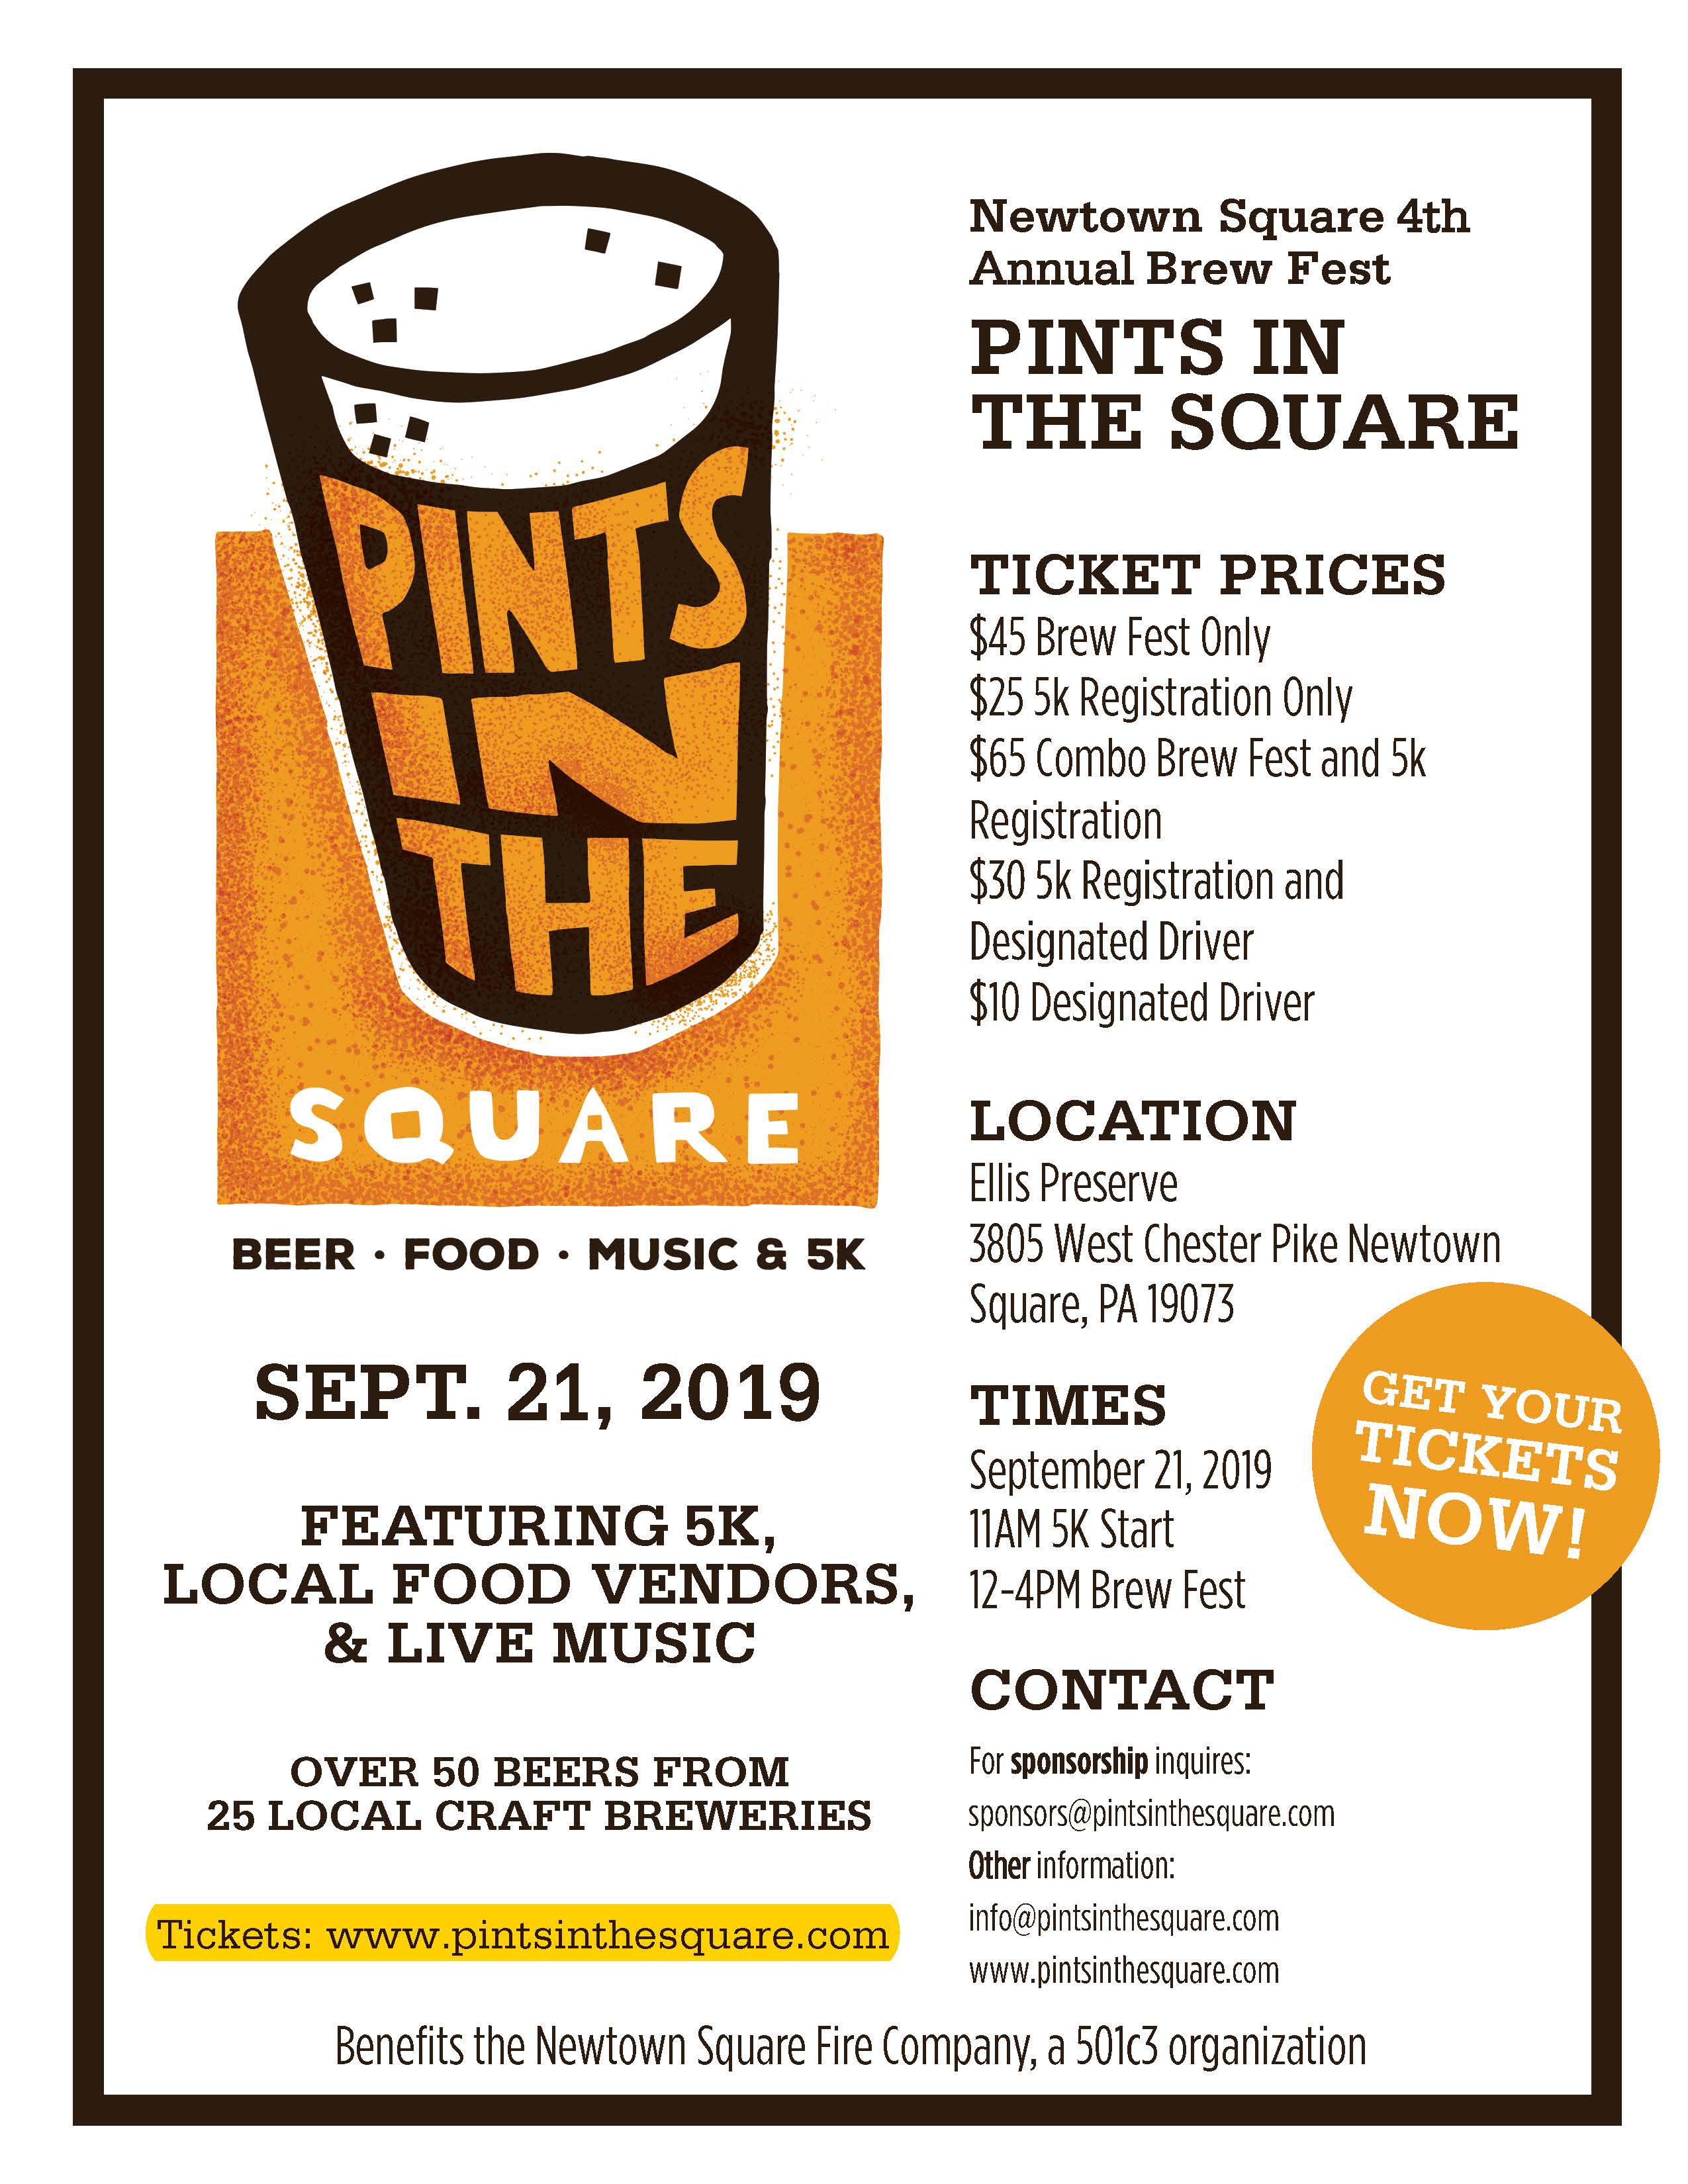 4th Annual Pints in the Square Craft BREW FEST and 5K Newtown Square